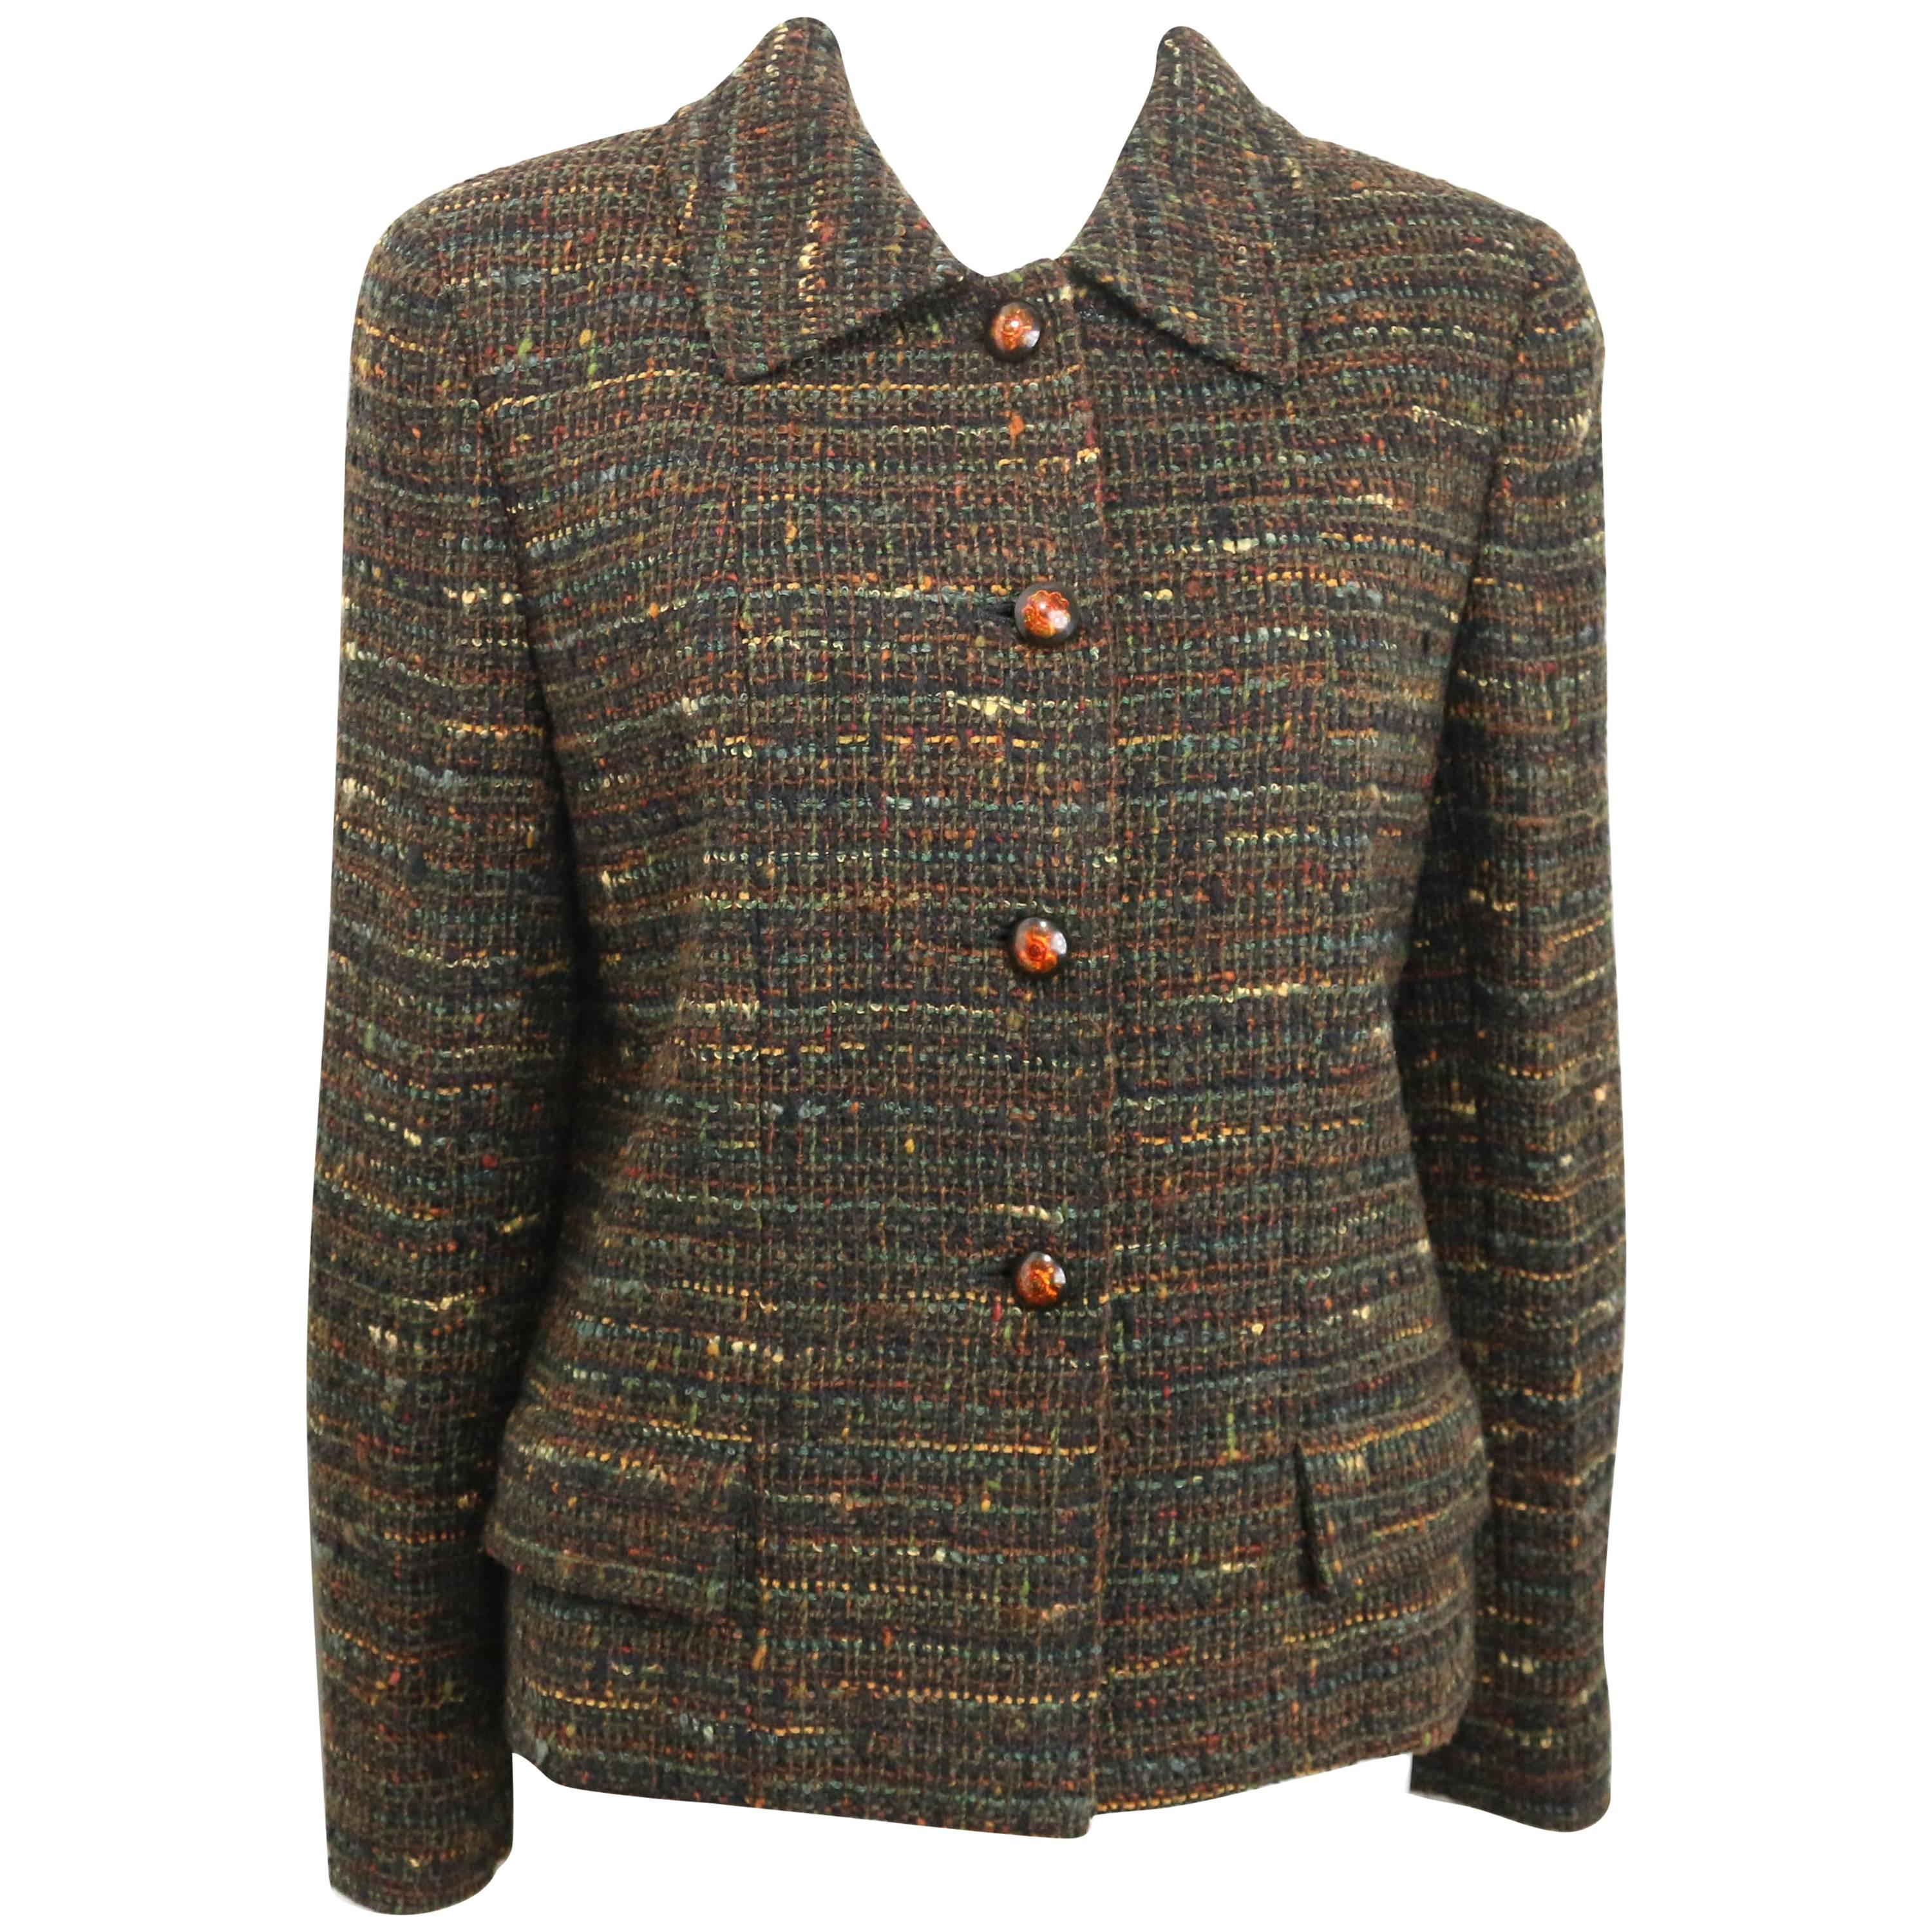 Chanel - Authenticated Jacket - Tweed Brown Plain for Women, Good Condition